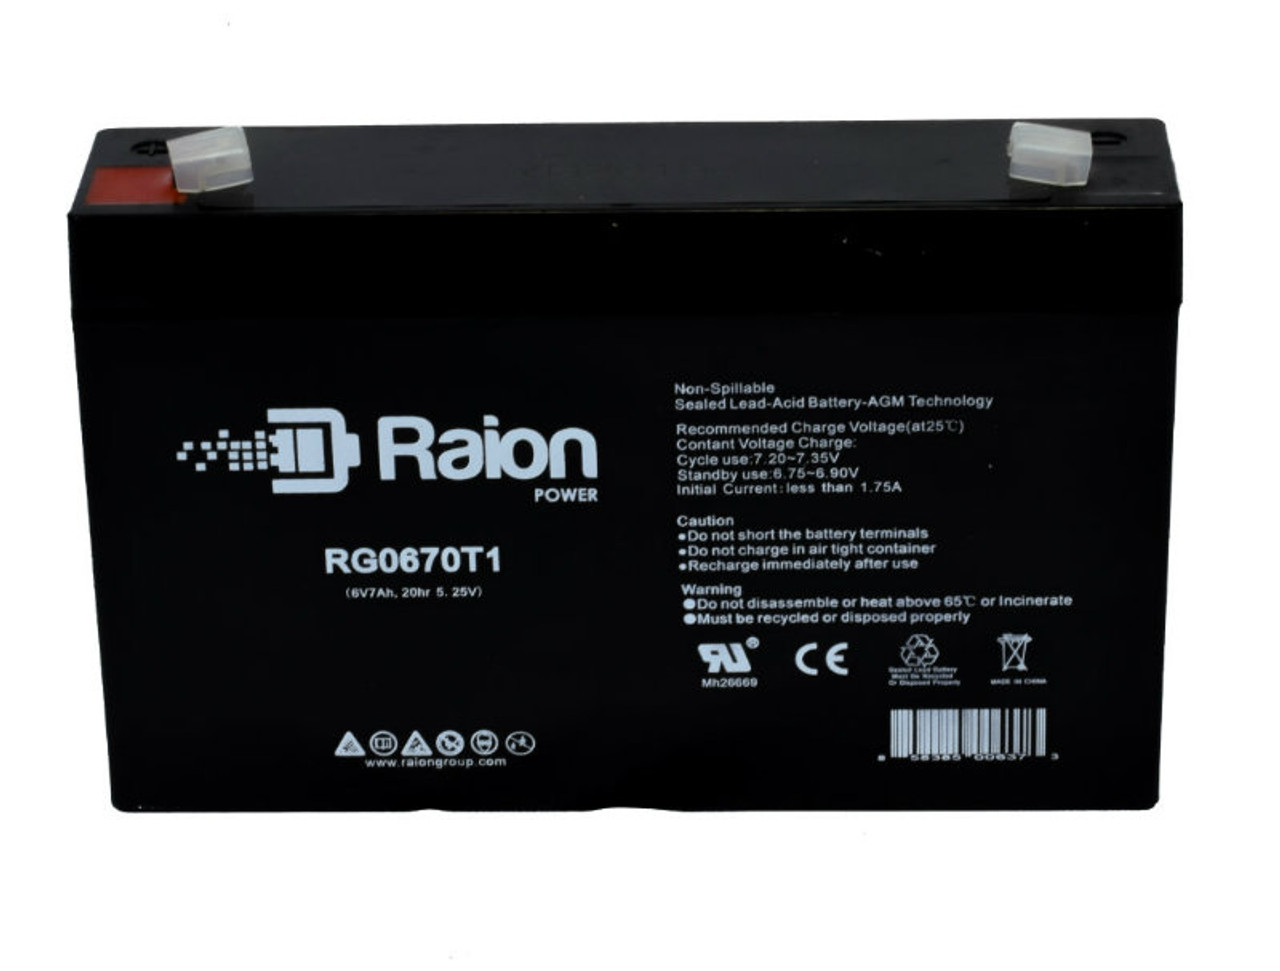 Raion Power RG0670T1 Replacement Battery Cartridge for Technacell EP650